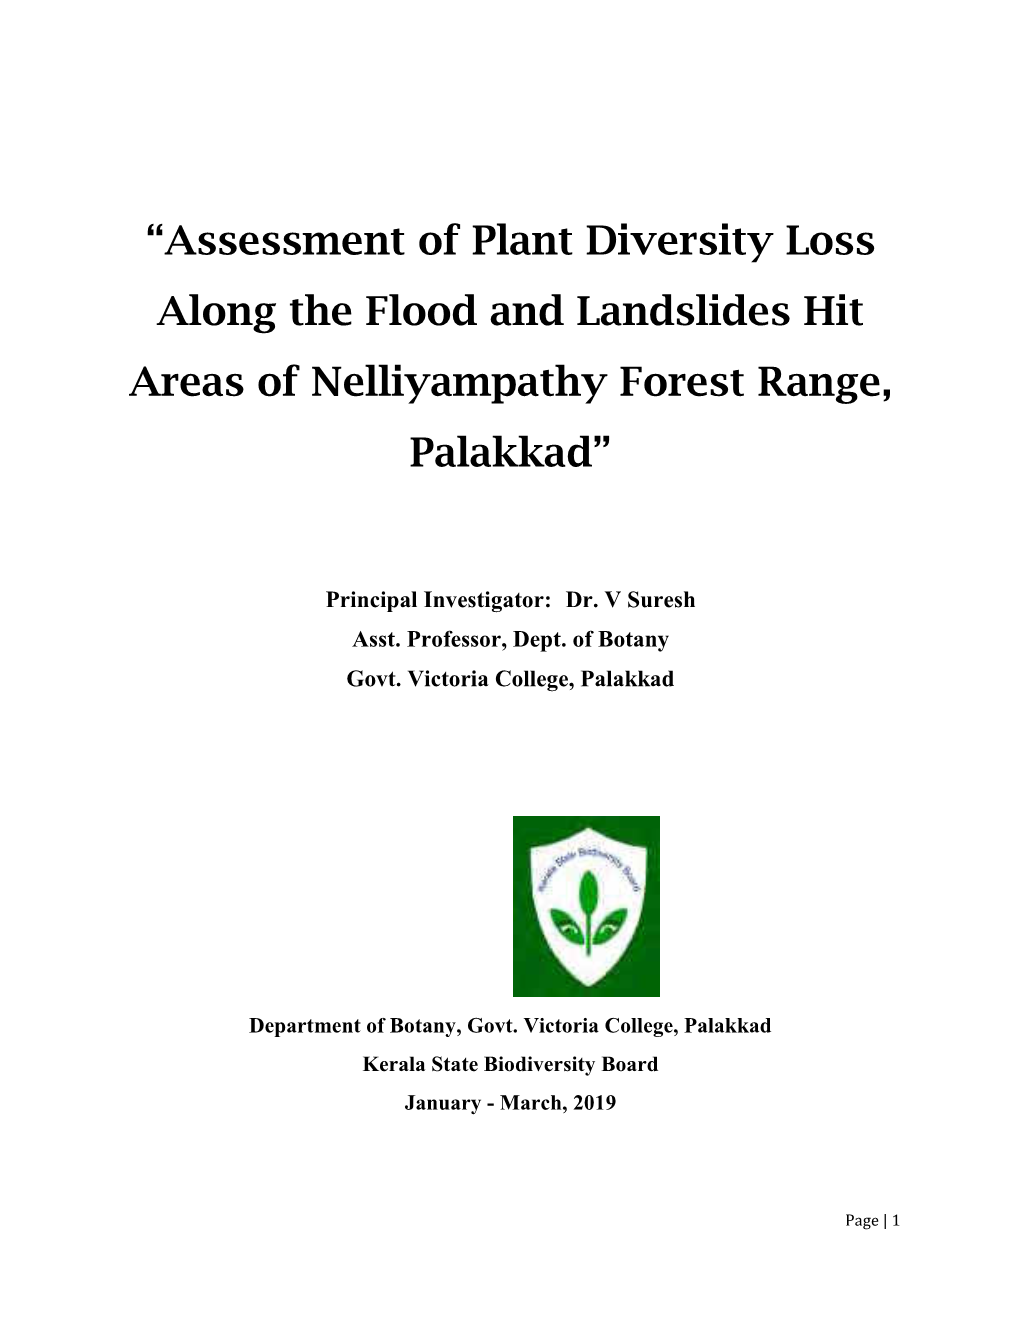 Assessment of Plant Diversity Loss Along the Flood and Landslides Hit Areas of Nelliyampathy Forest Range, Palakkad”